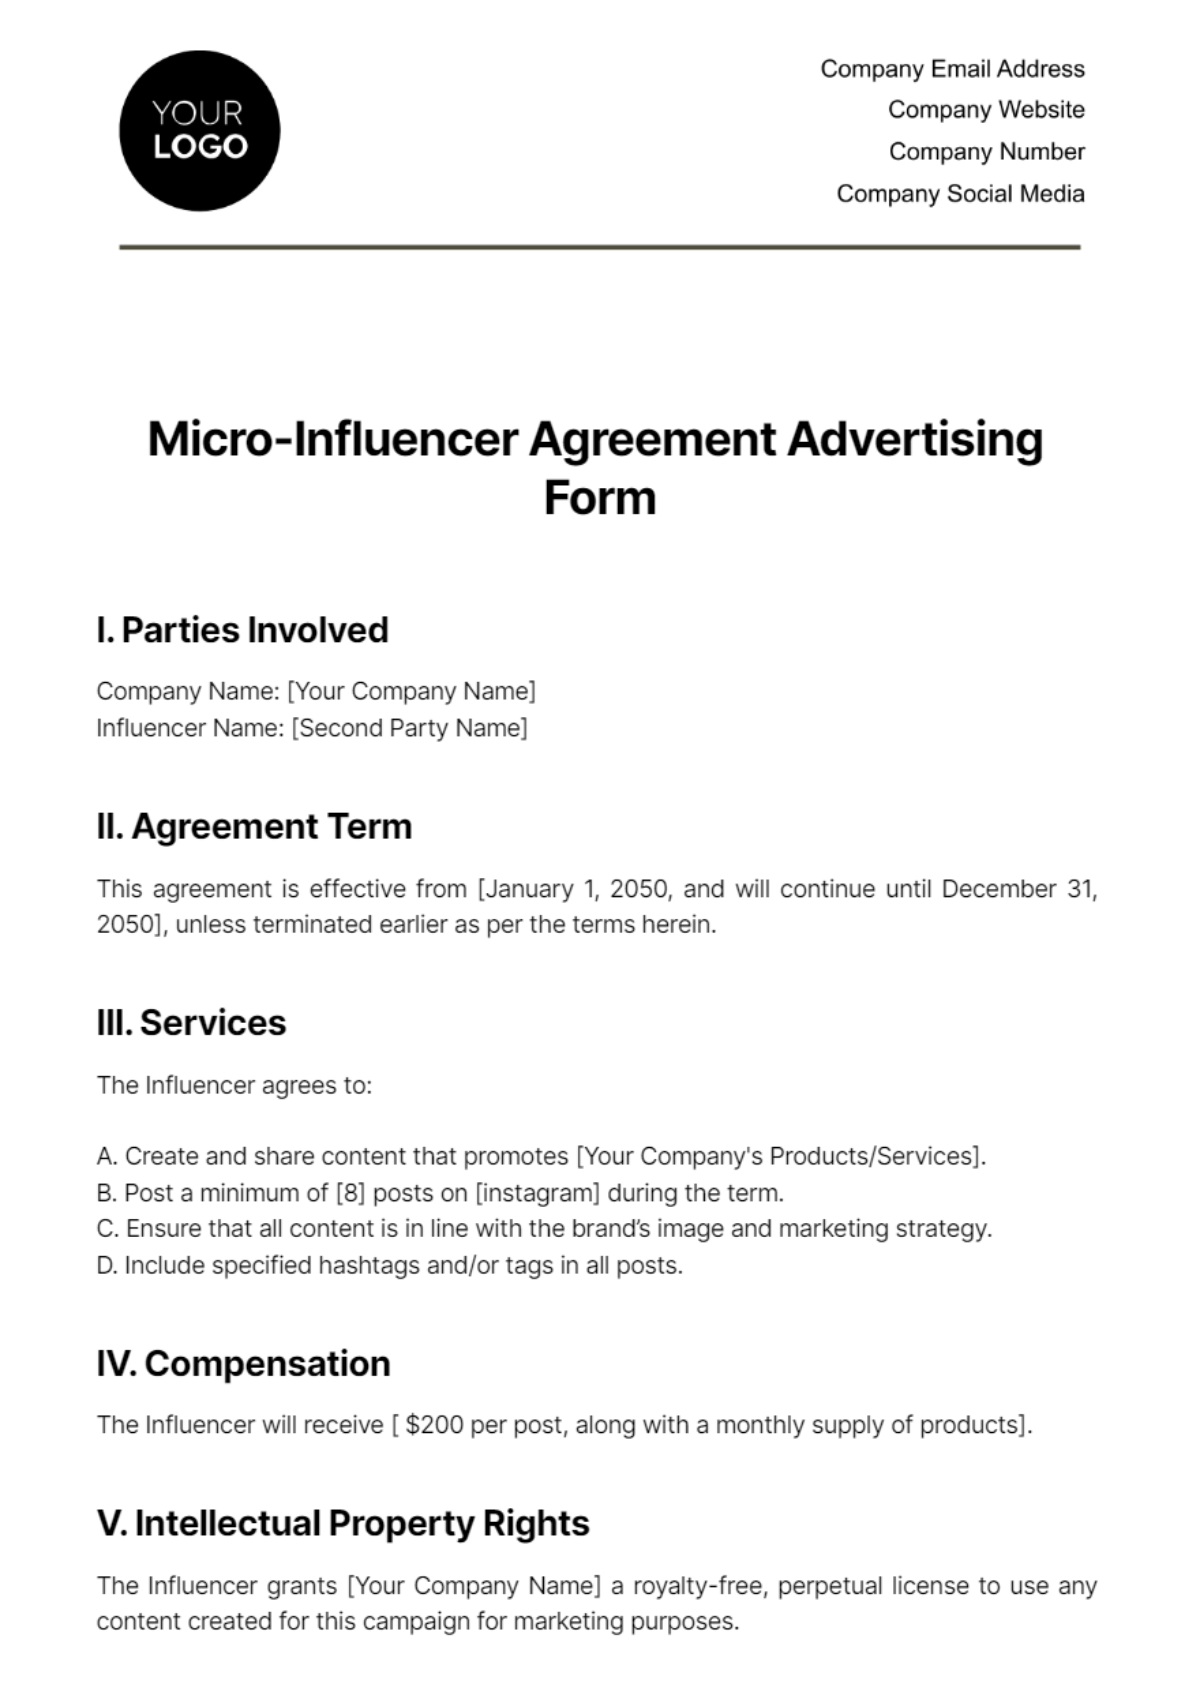 Micro-Influencer Agreement Advertising Form Template